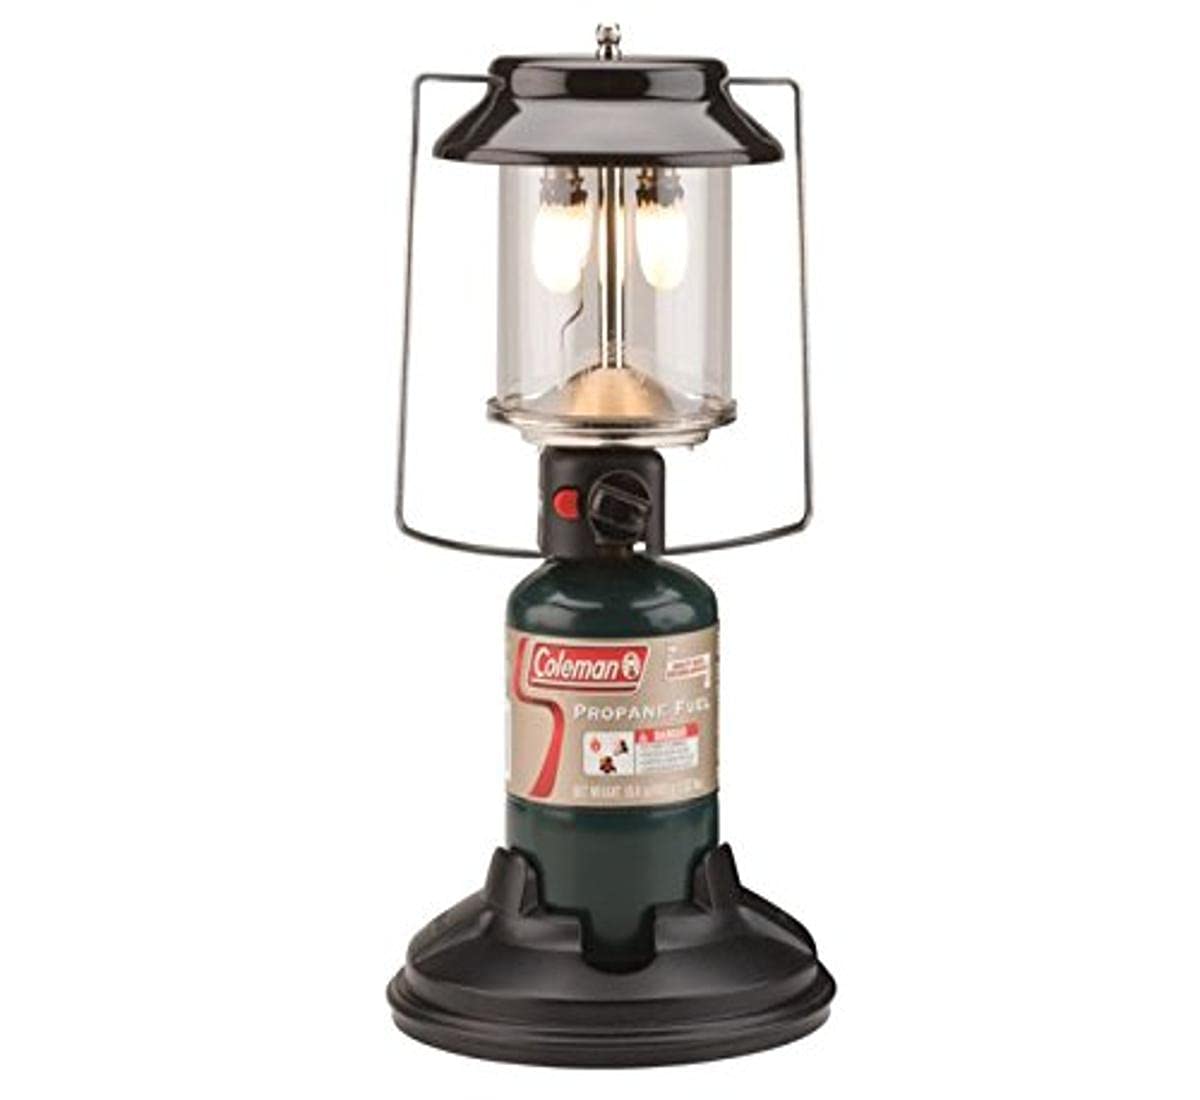 Coleman Gas Lantern | 1000 Lumens QuickPack 2-Mantle Propane Lantern with Carry Case